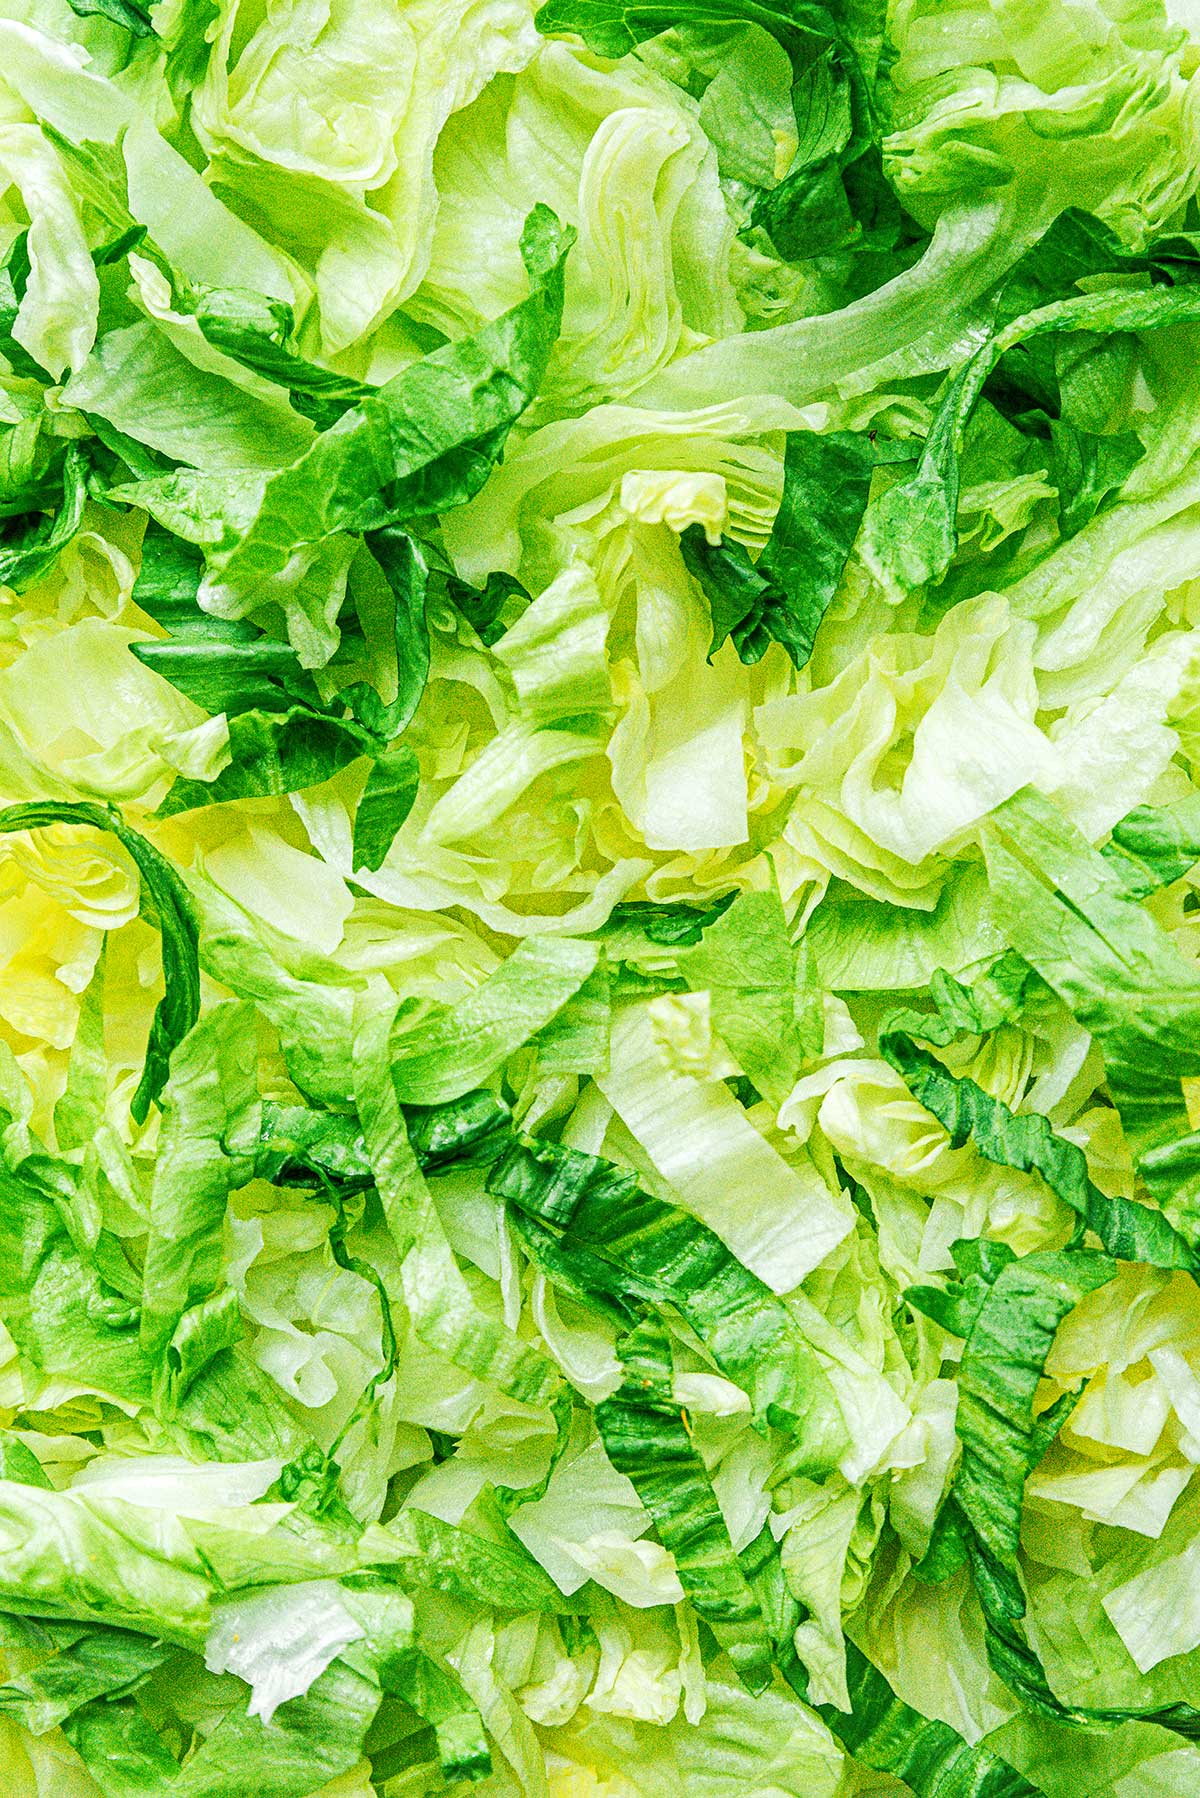 An up-close view detailing the color and texture of shredded iceberg lettuce